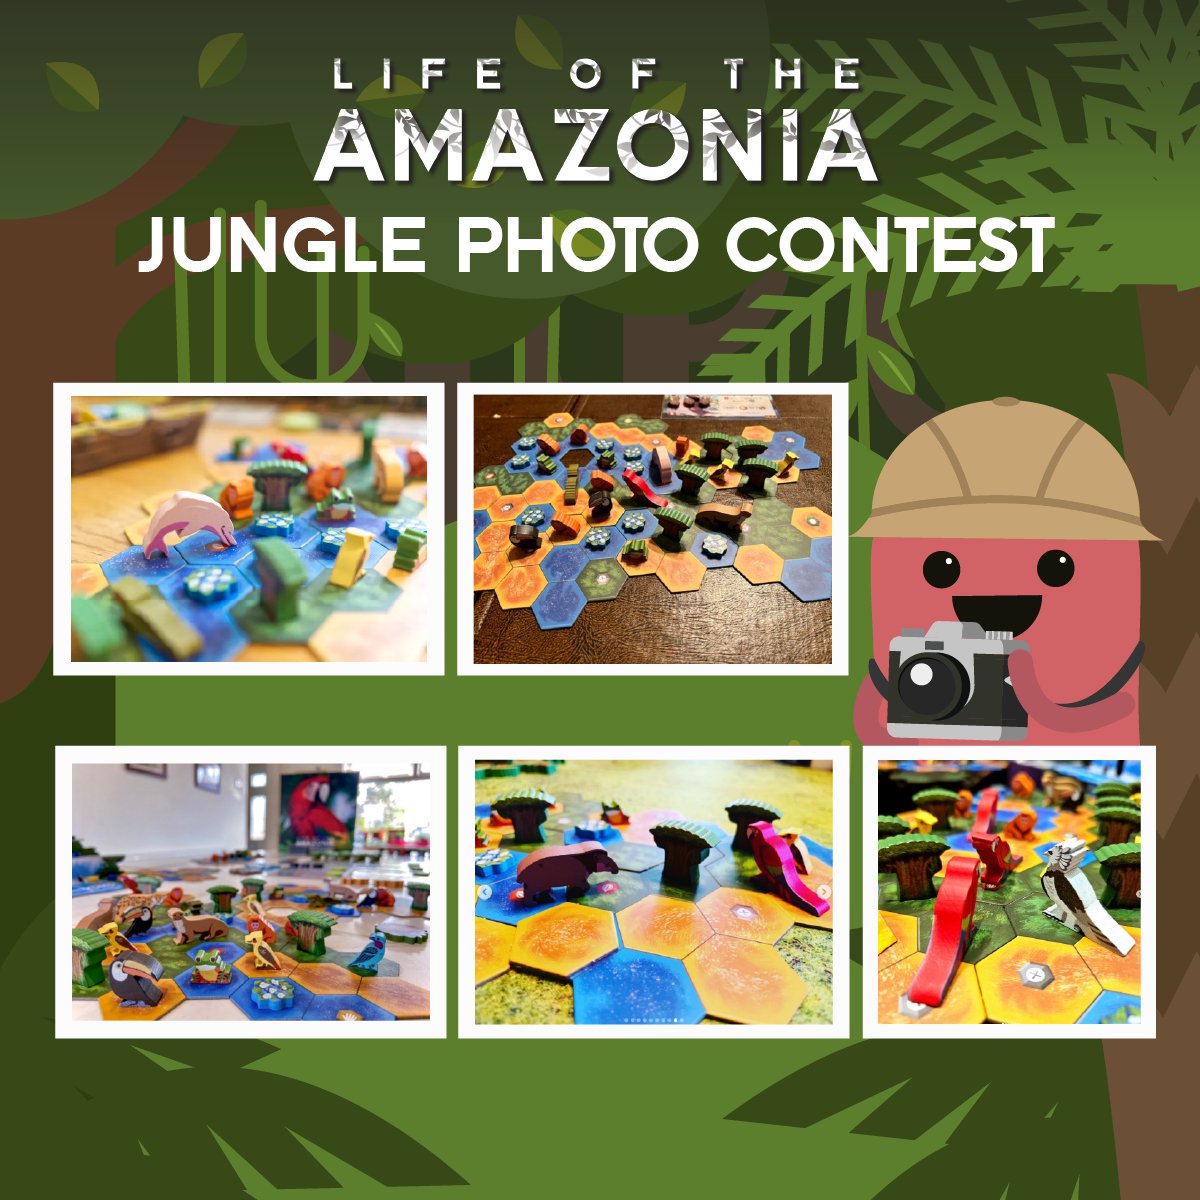 Photo Contest Winners We've selected 5 winners for our LOTA Photo contest! They are as follows: 1. BGG:@kernowboy 2. Insta:spielfritte 3. Insta:korean_bgg 4. FB: Allison Kneifl 5. FB:Stacie Mark Hardy Congratulations to our winners and thanks everyone for your participation!